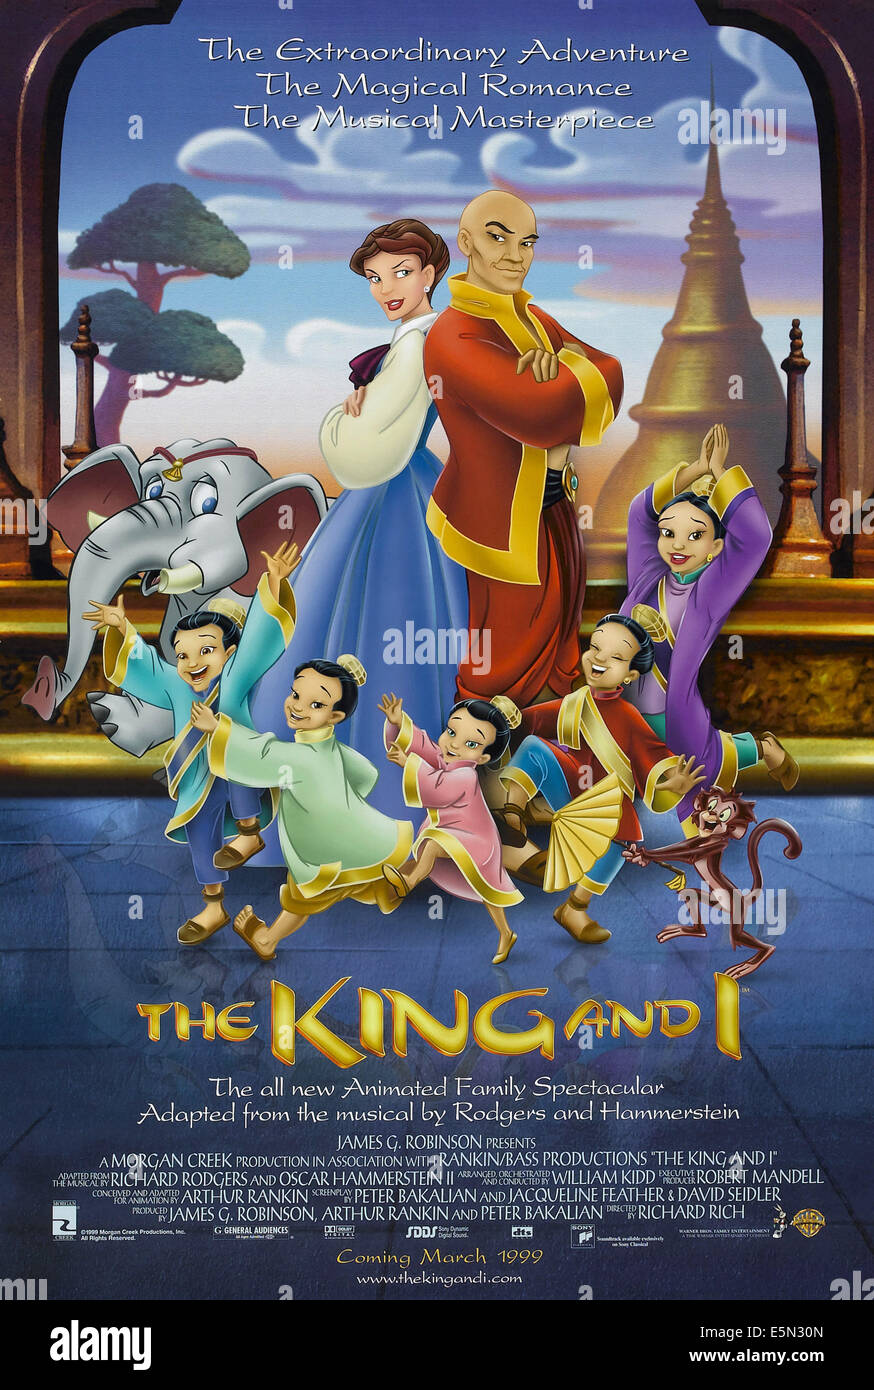 THE KING AND I, US advance poster art, 1999, ©Warner Bros./courtesy Everett Collection Stock Photo